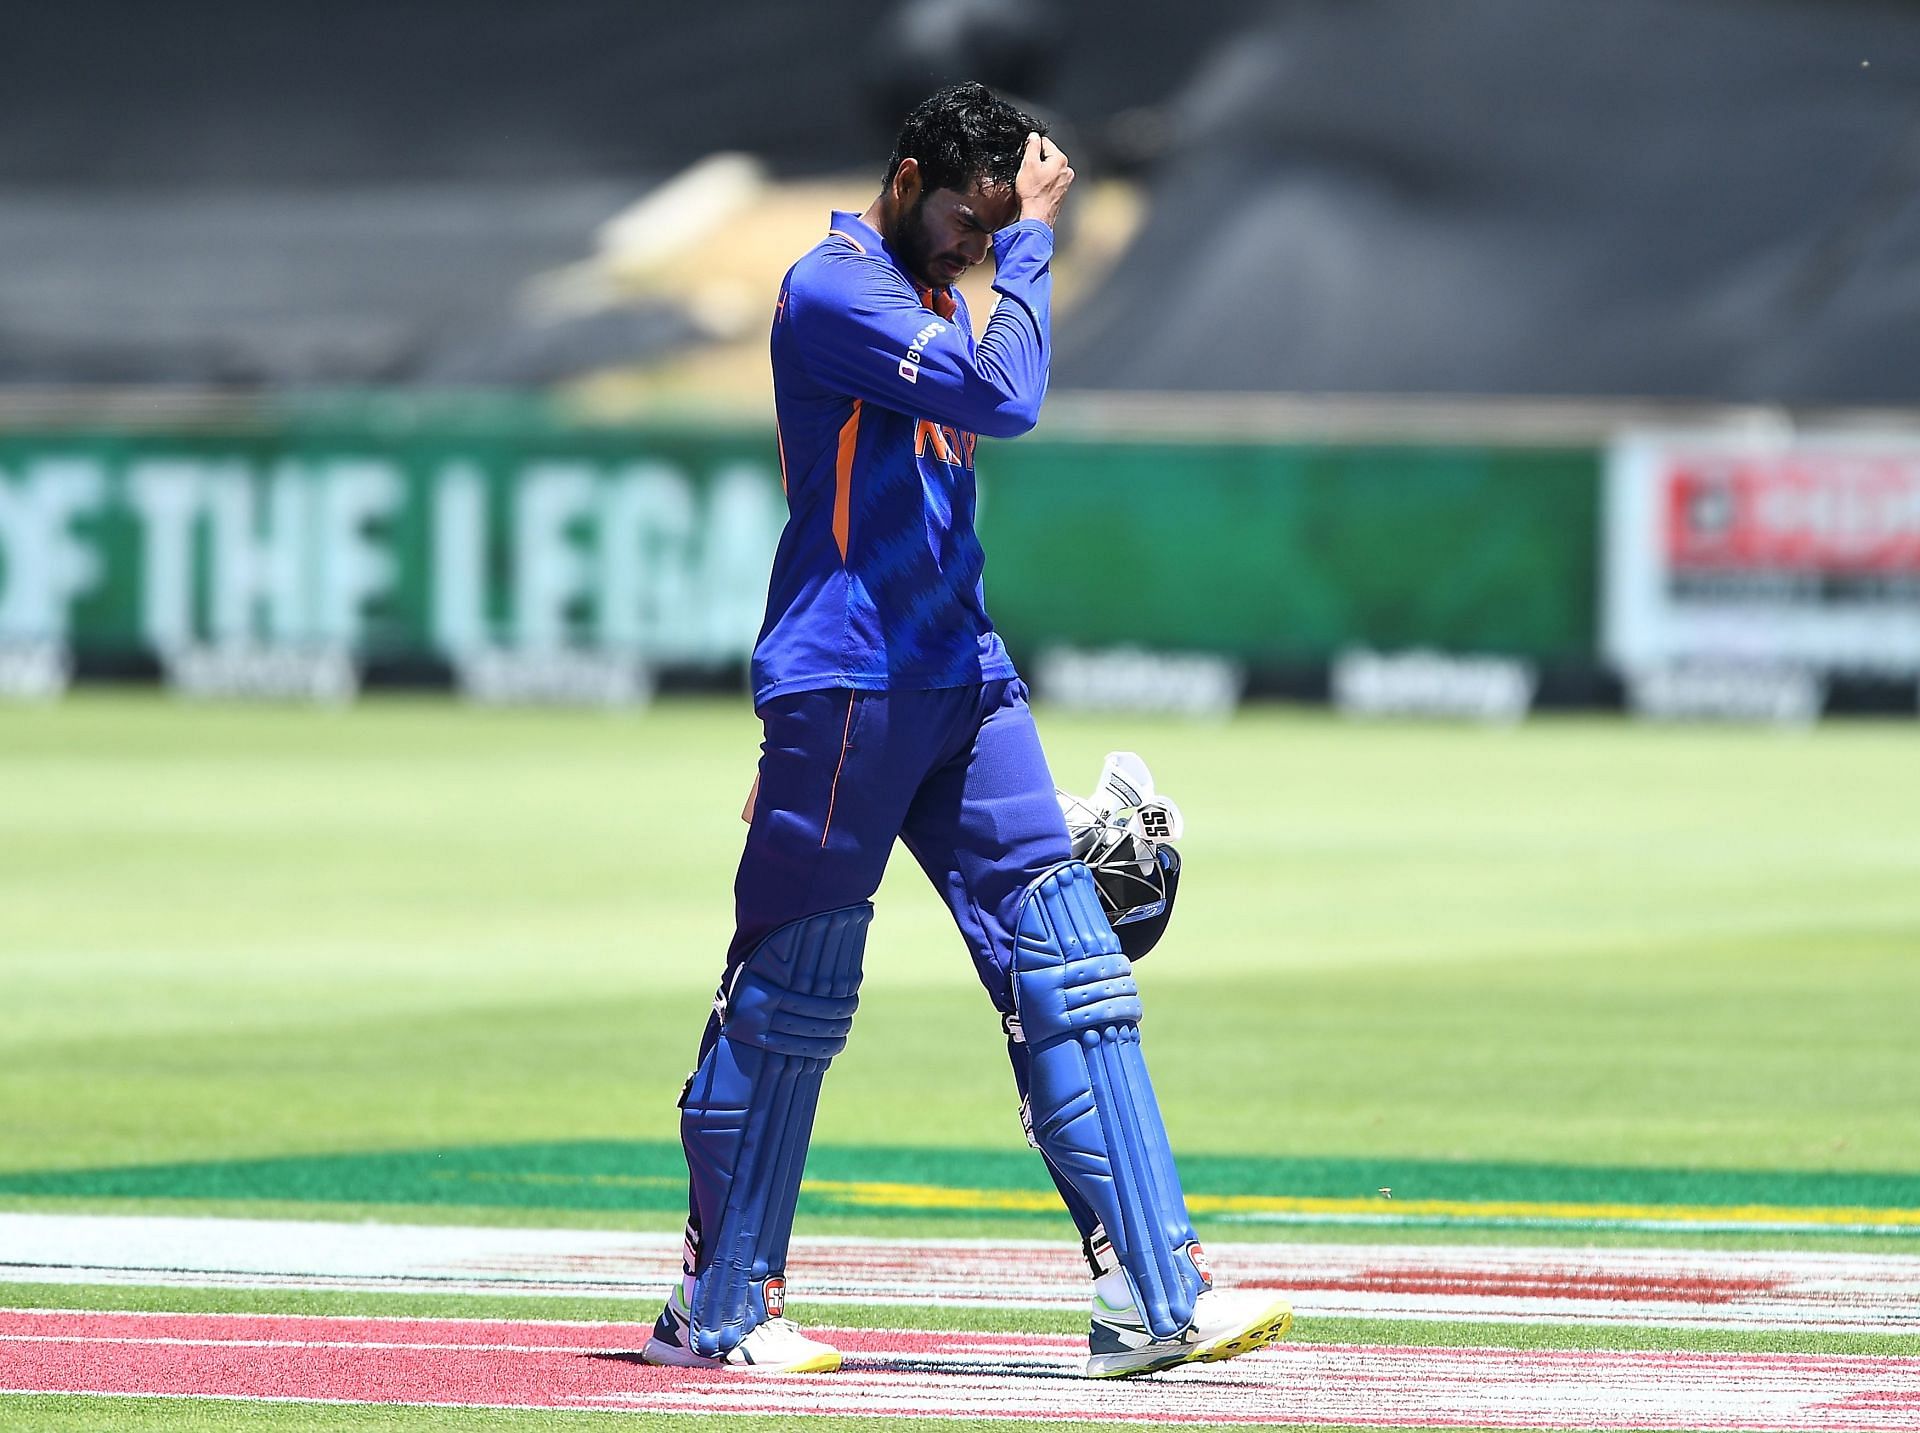 Venkatesh Iyer played just two matches in the ODI series against South Africa